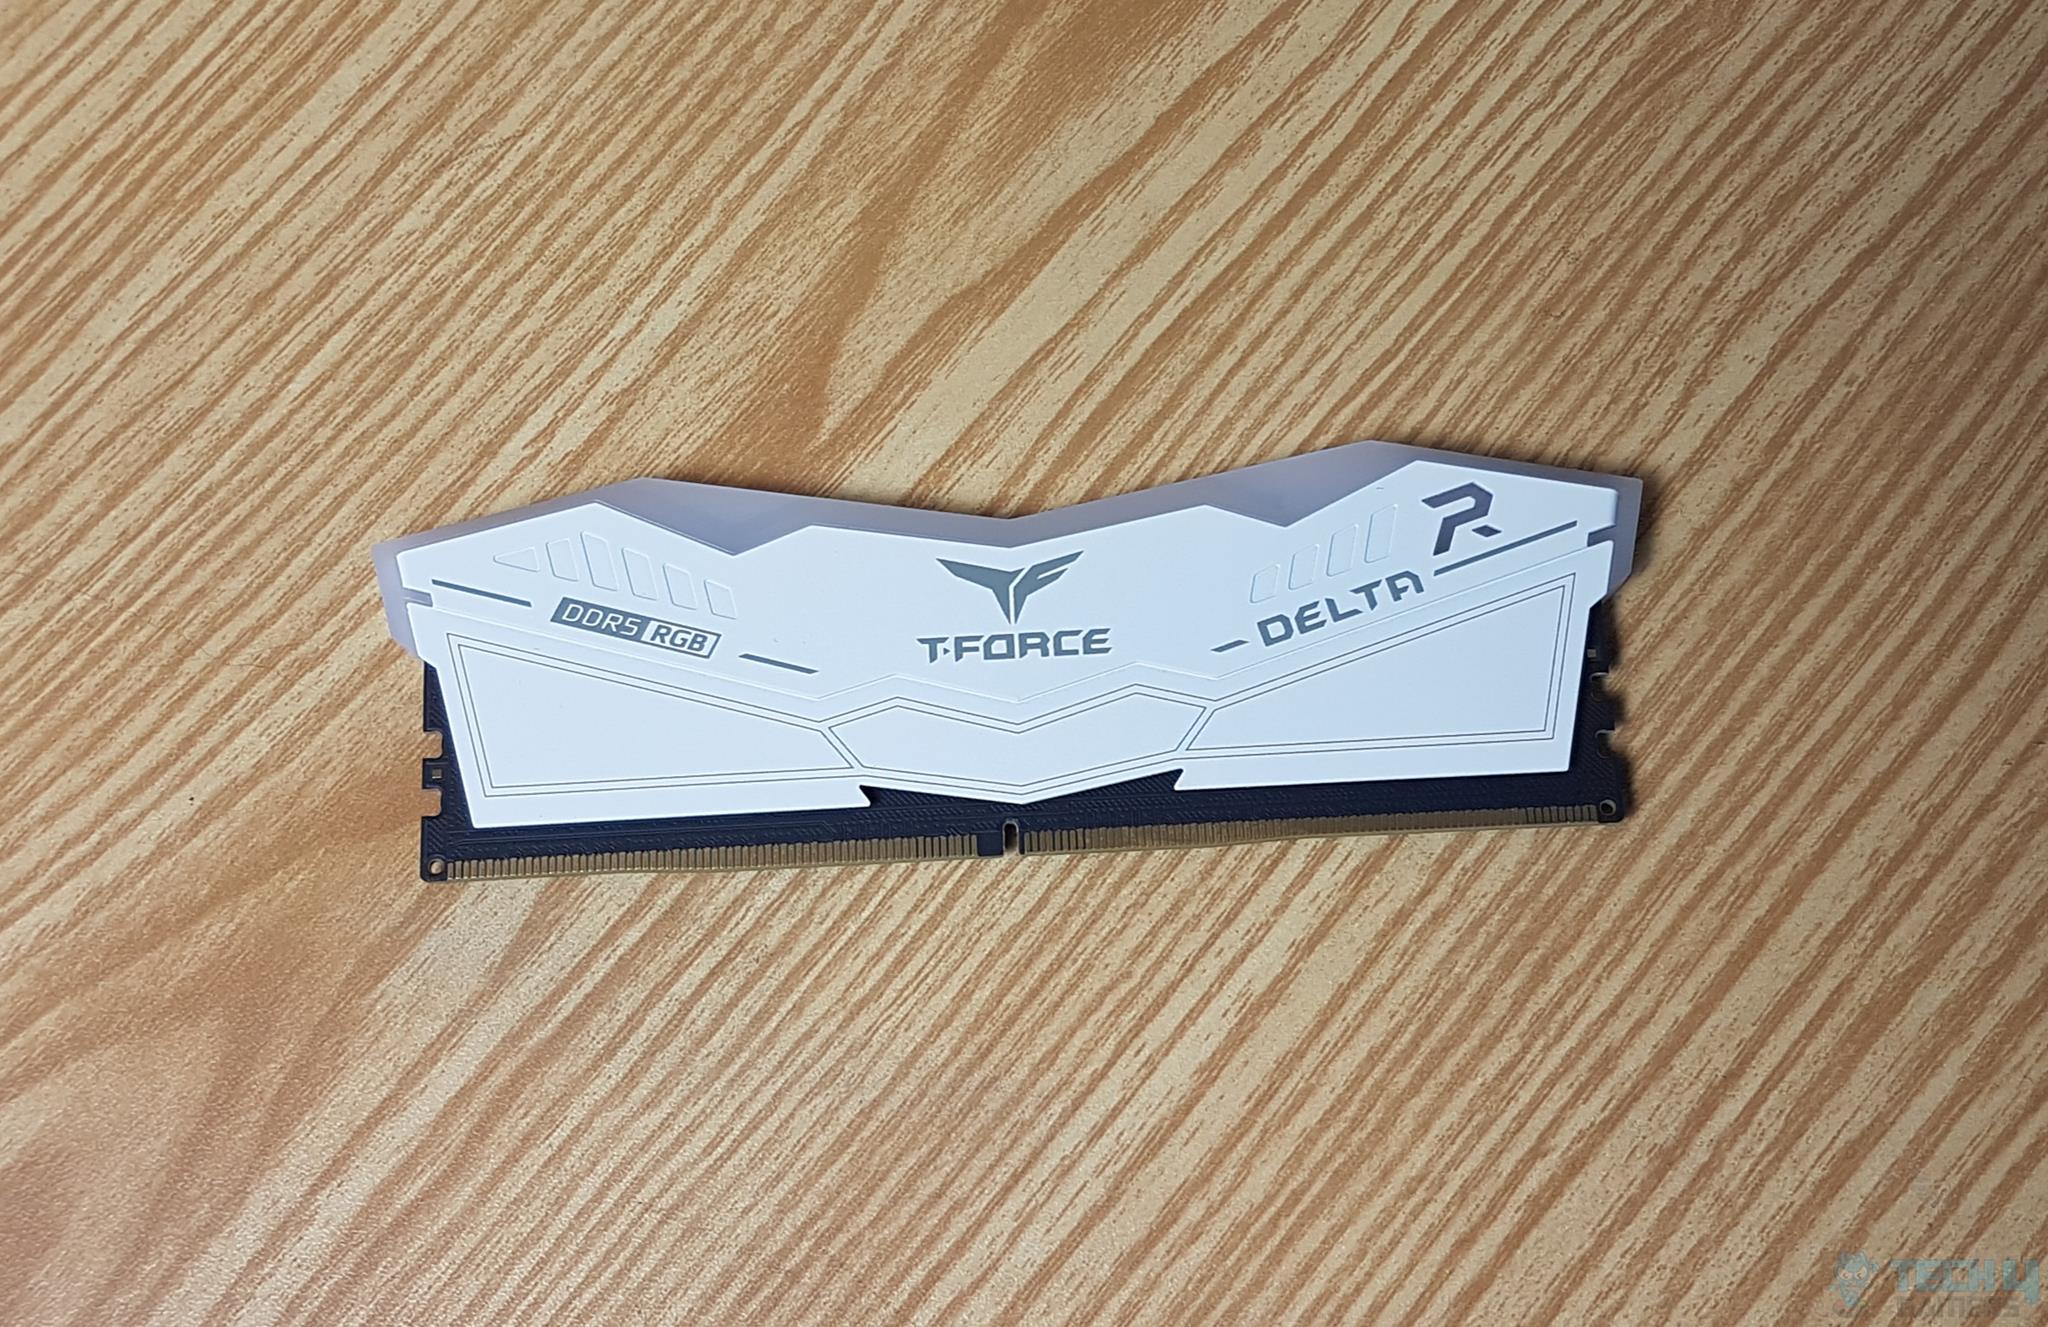 TEAMGROUP T-FORCE DELTA